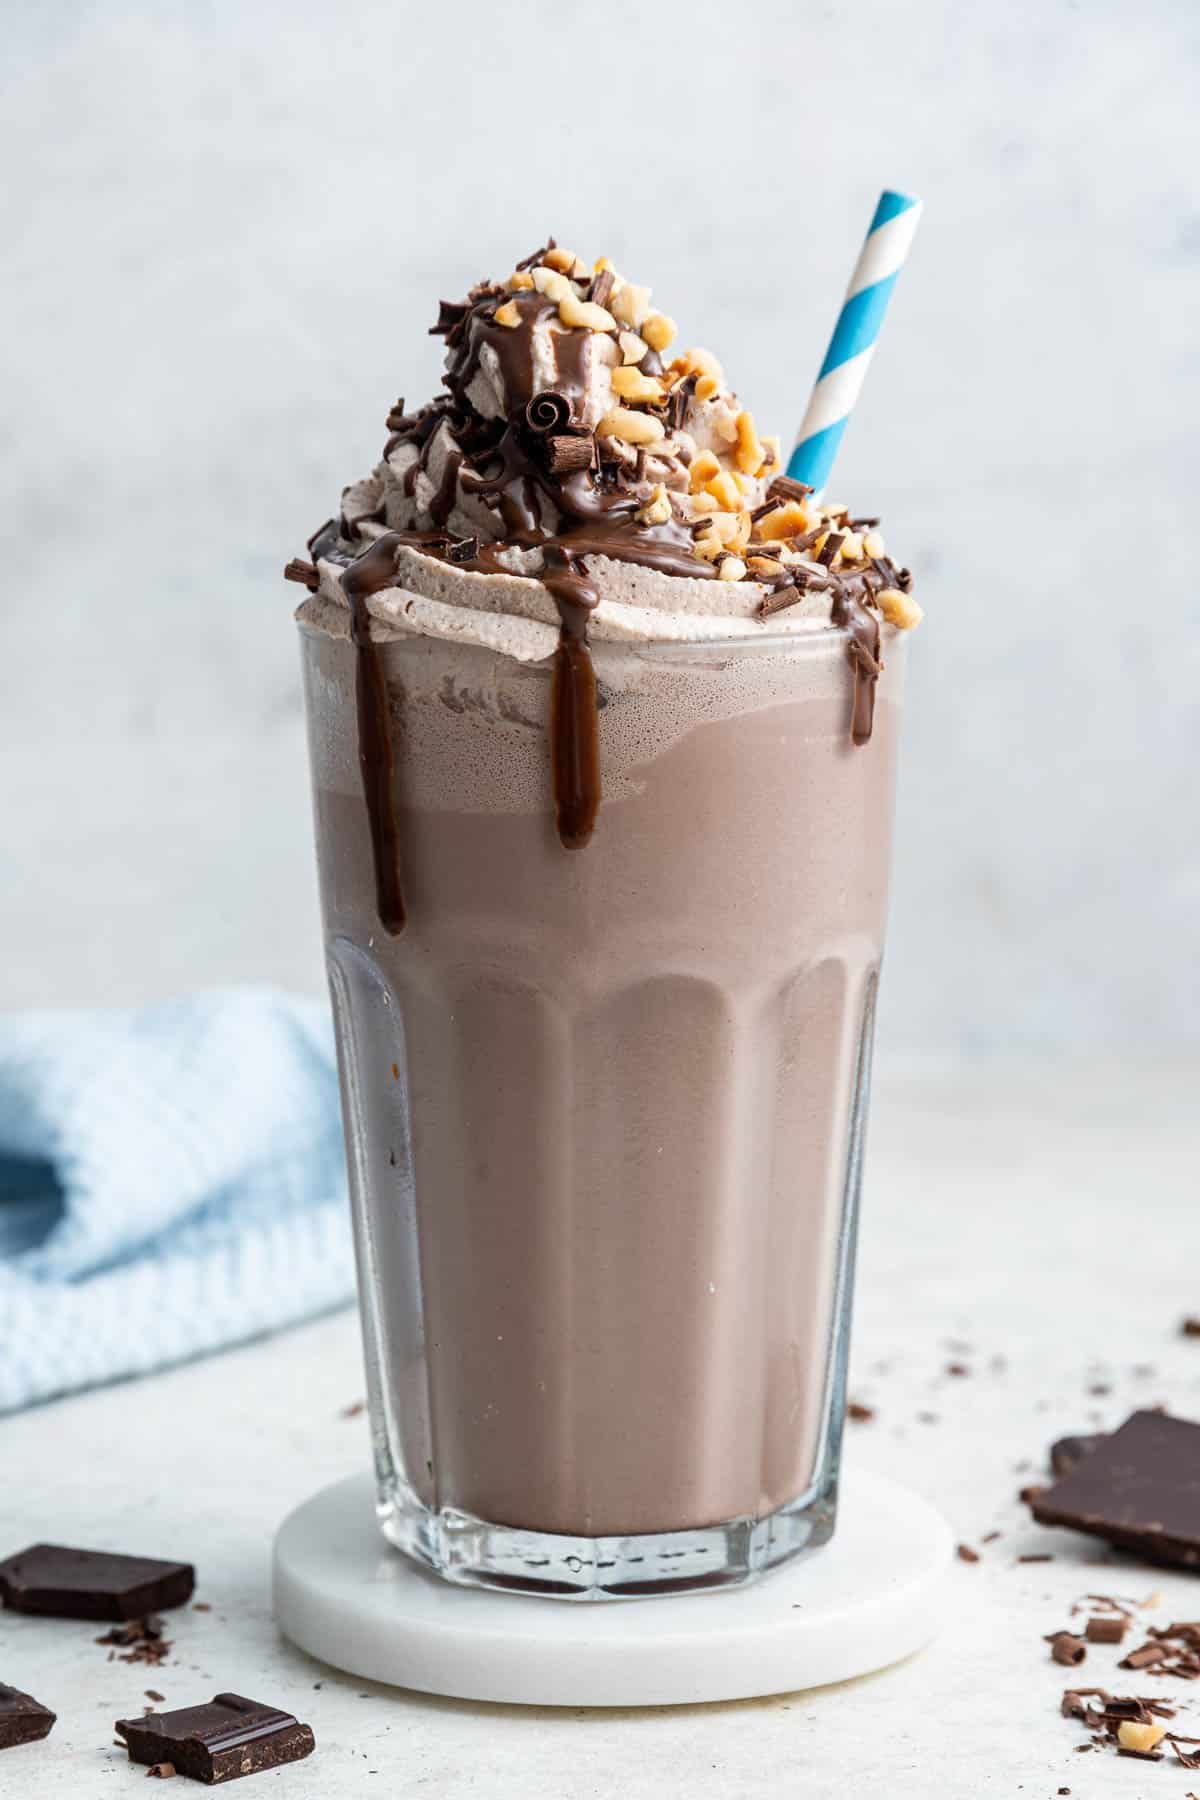 Chocolate milkshake in glass with whipped cream, chocolate drizzle and straw.